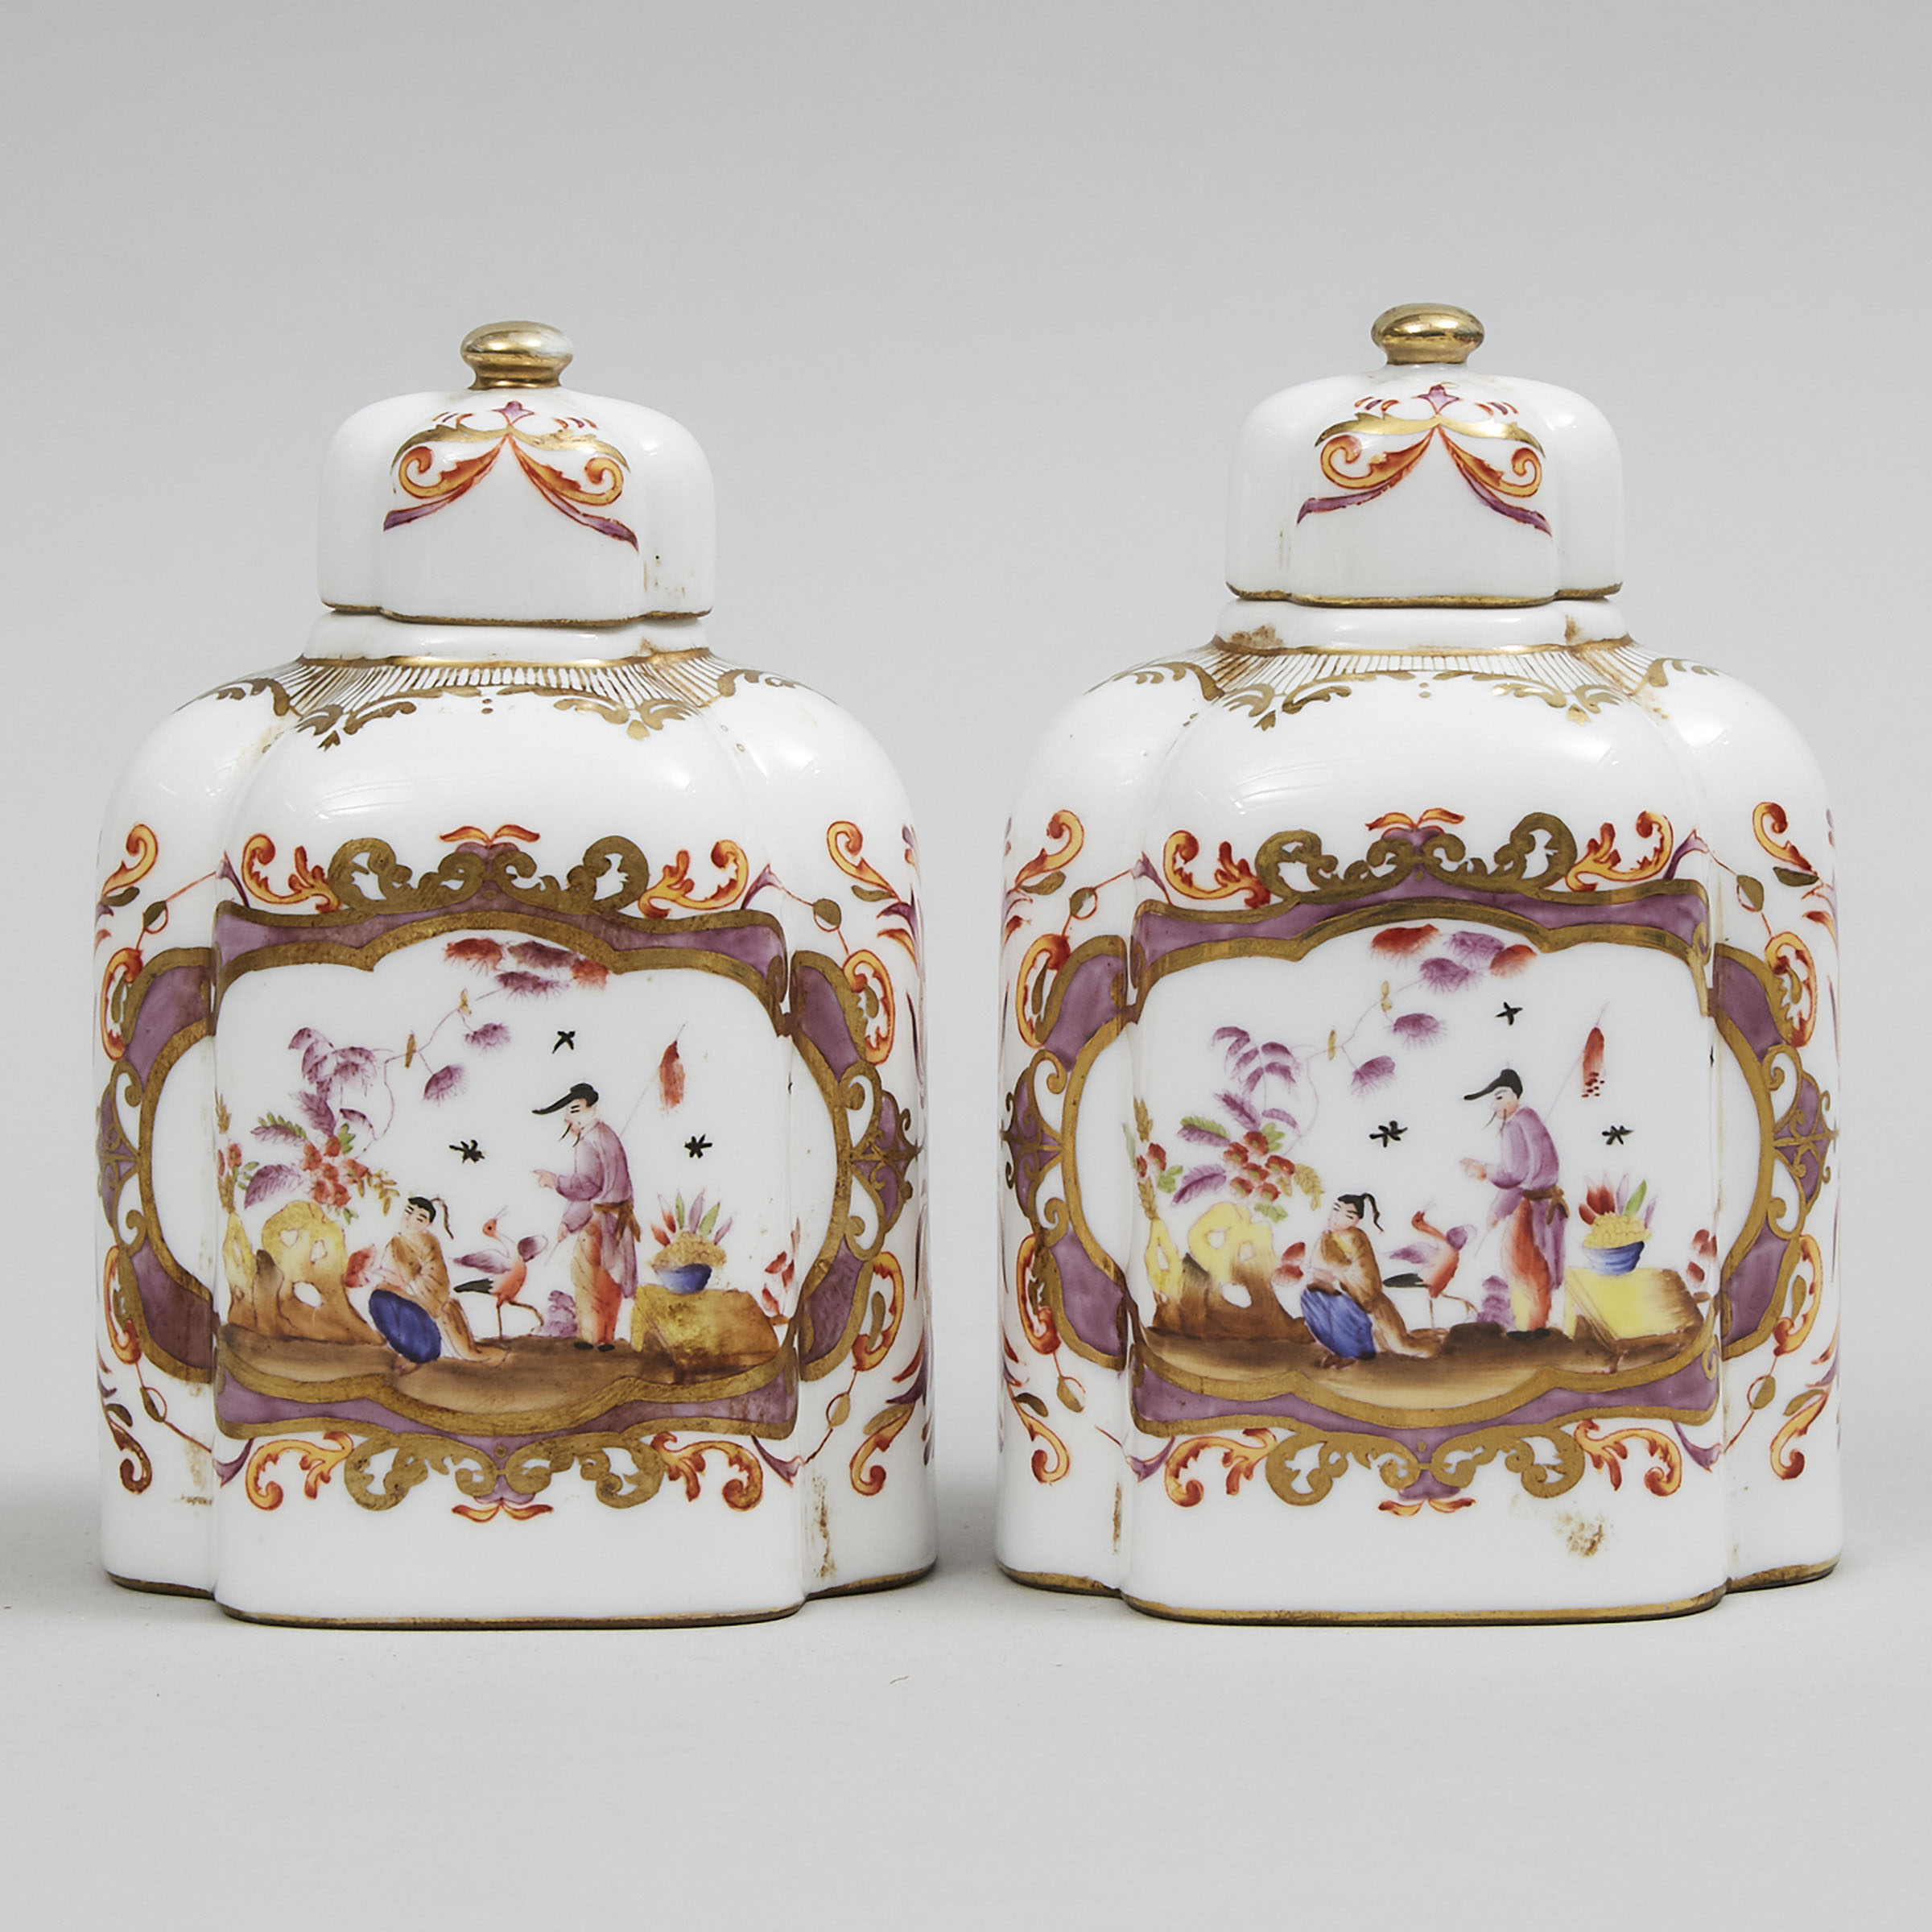 Pair of Continental Porcelain Tea Caddies, late 19th/early 20th century